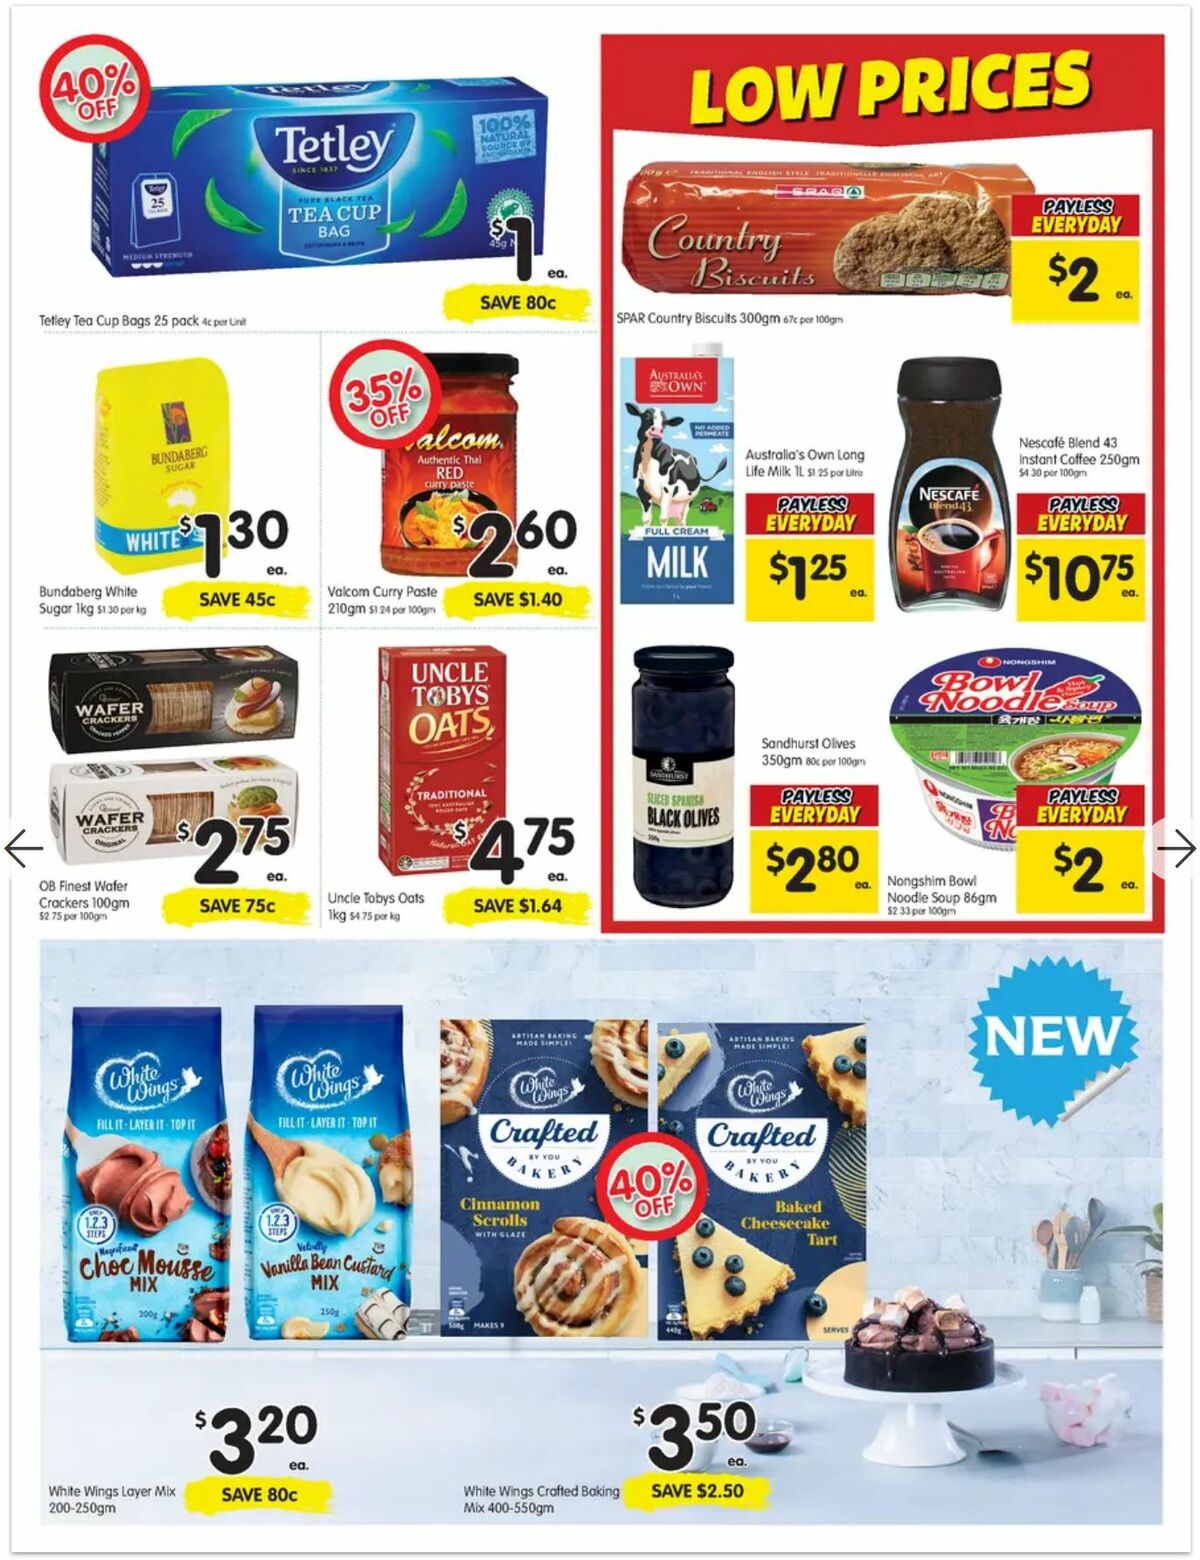 Spar Catalogues from 21 July